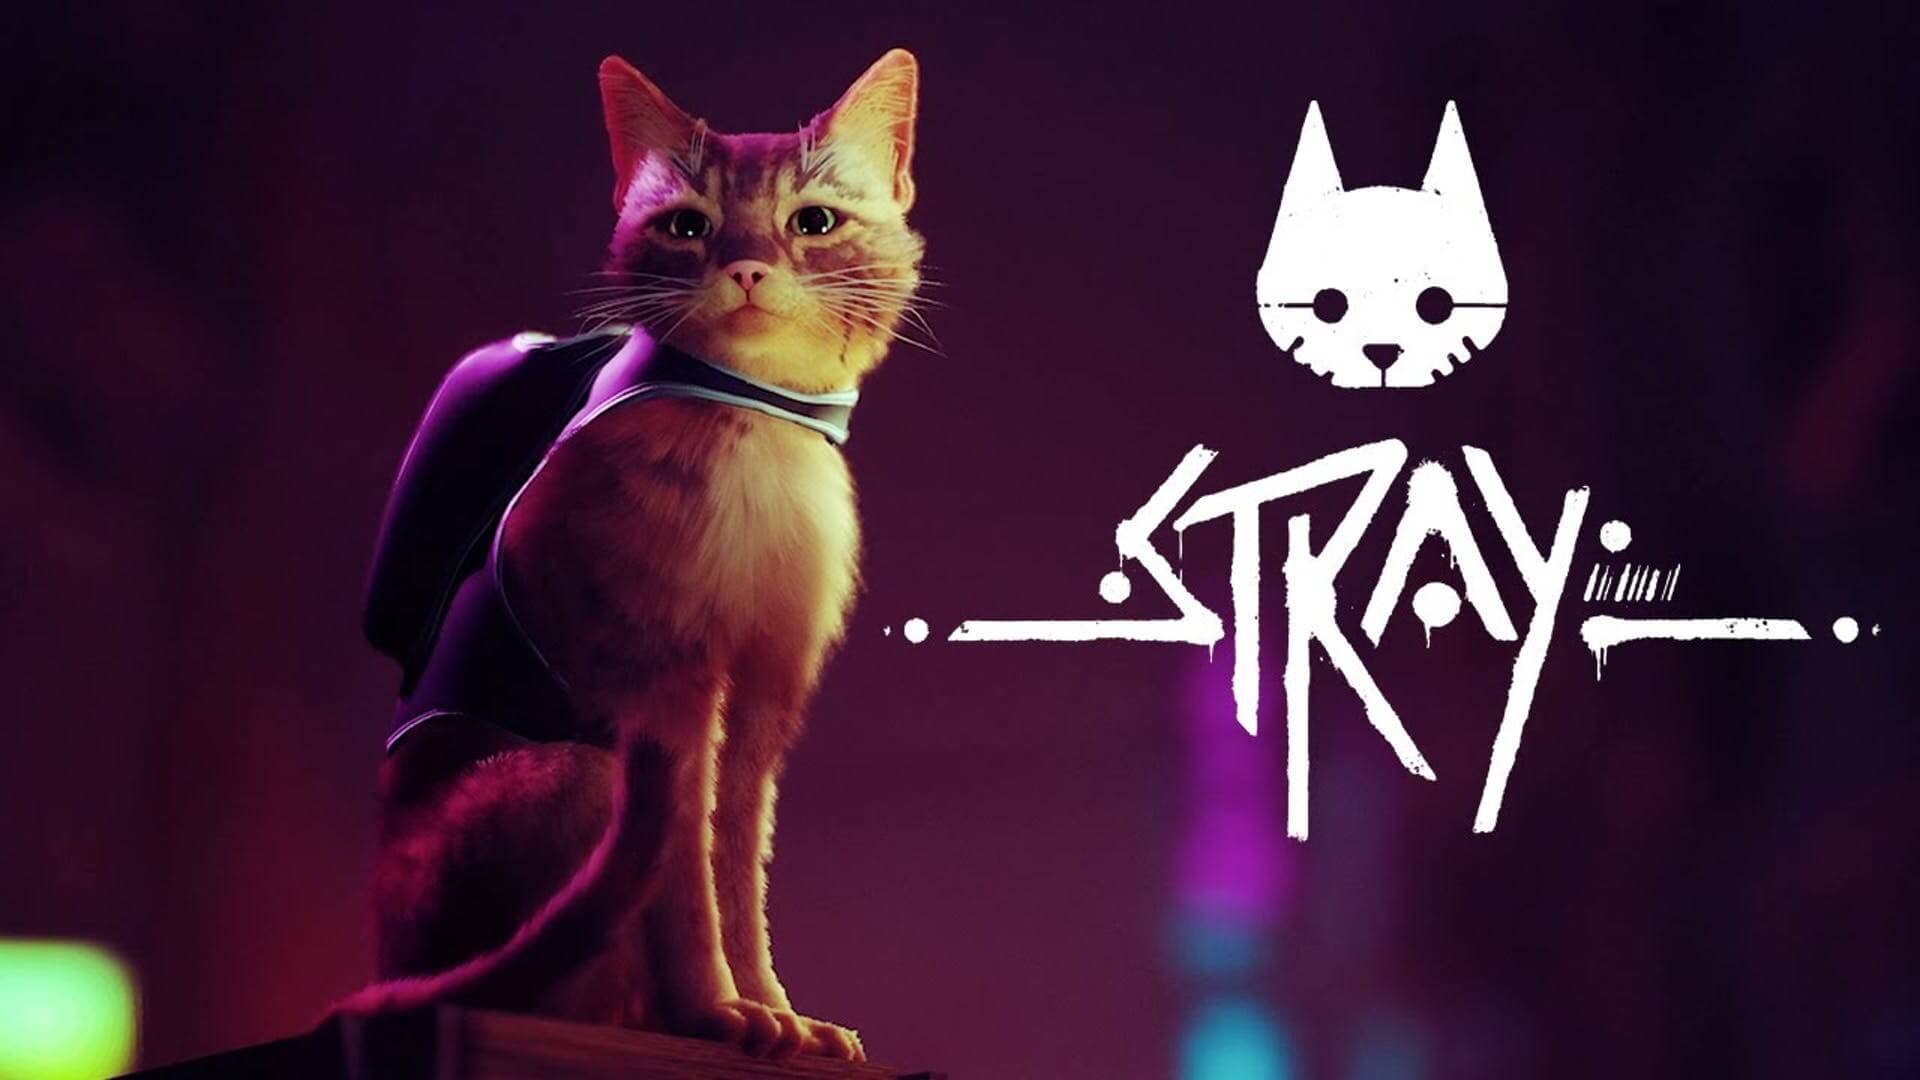 download the new Stray